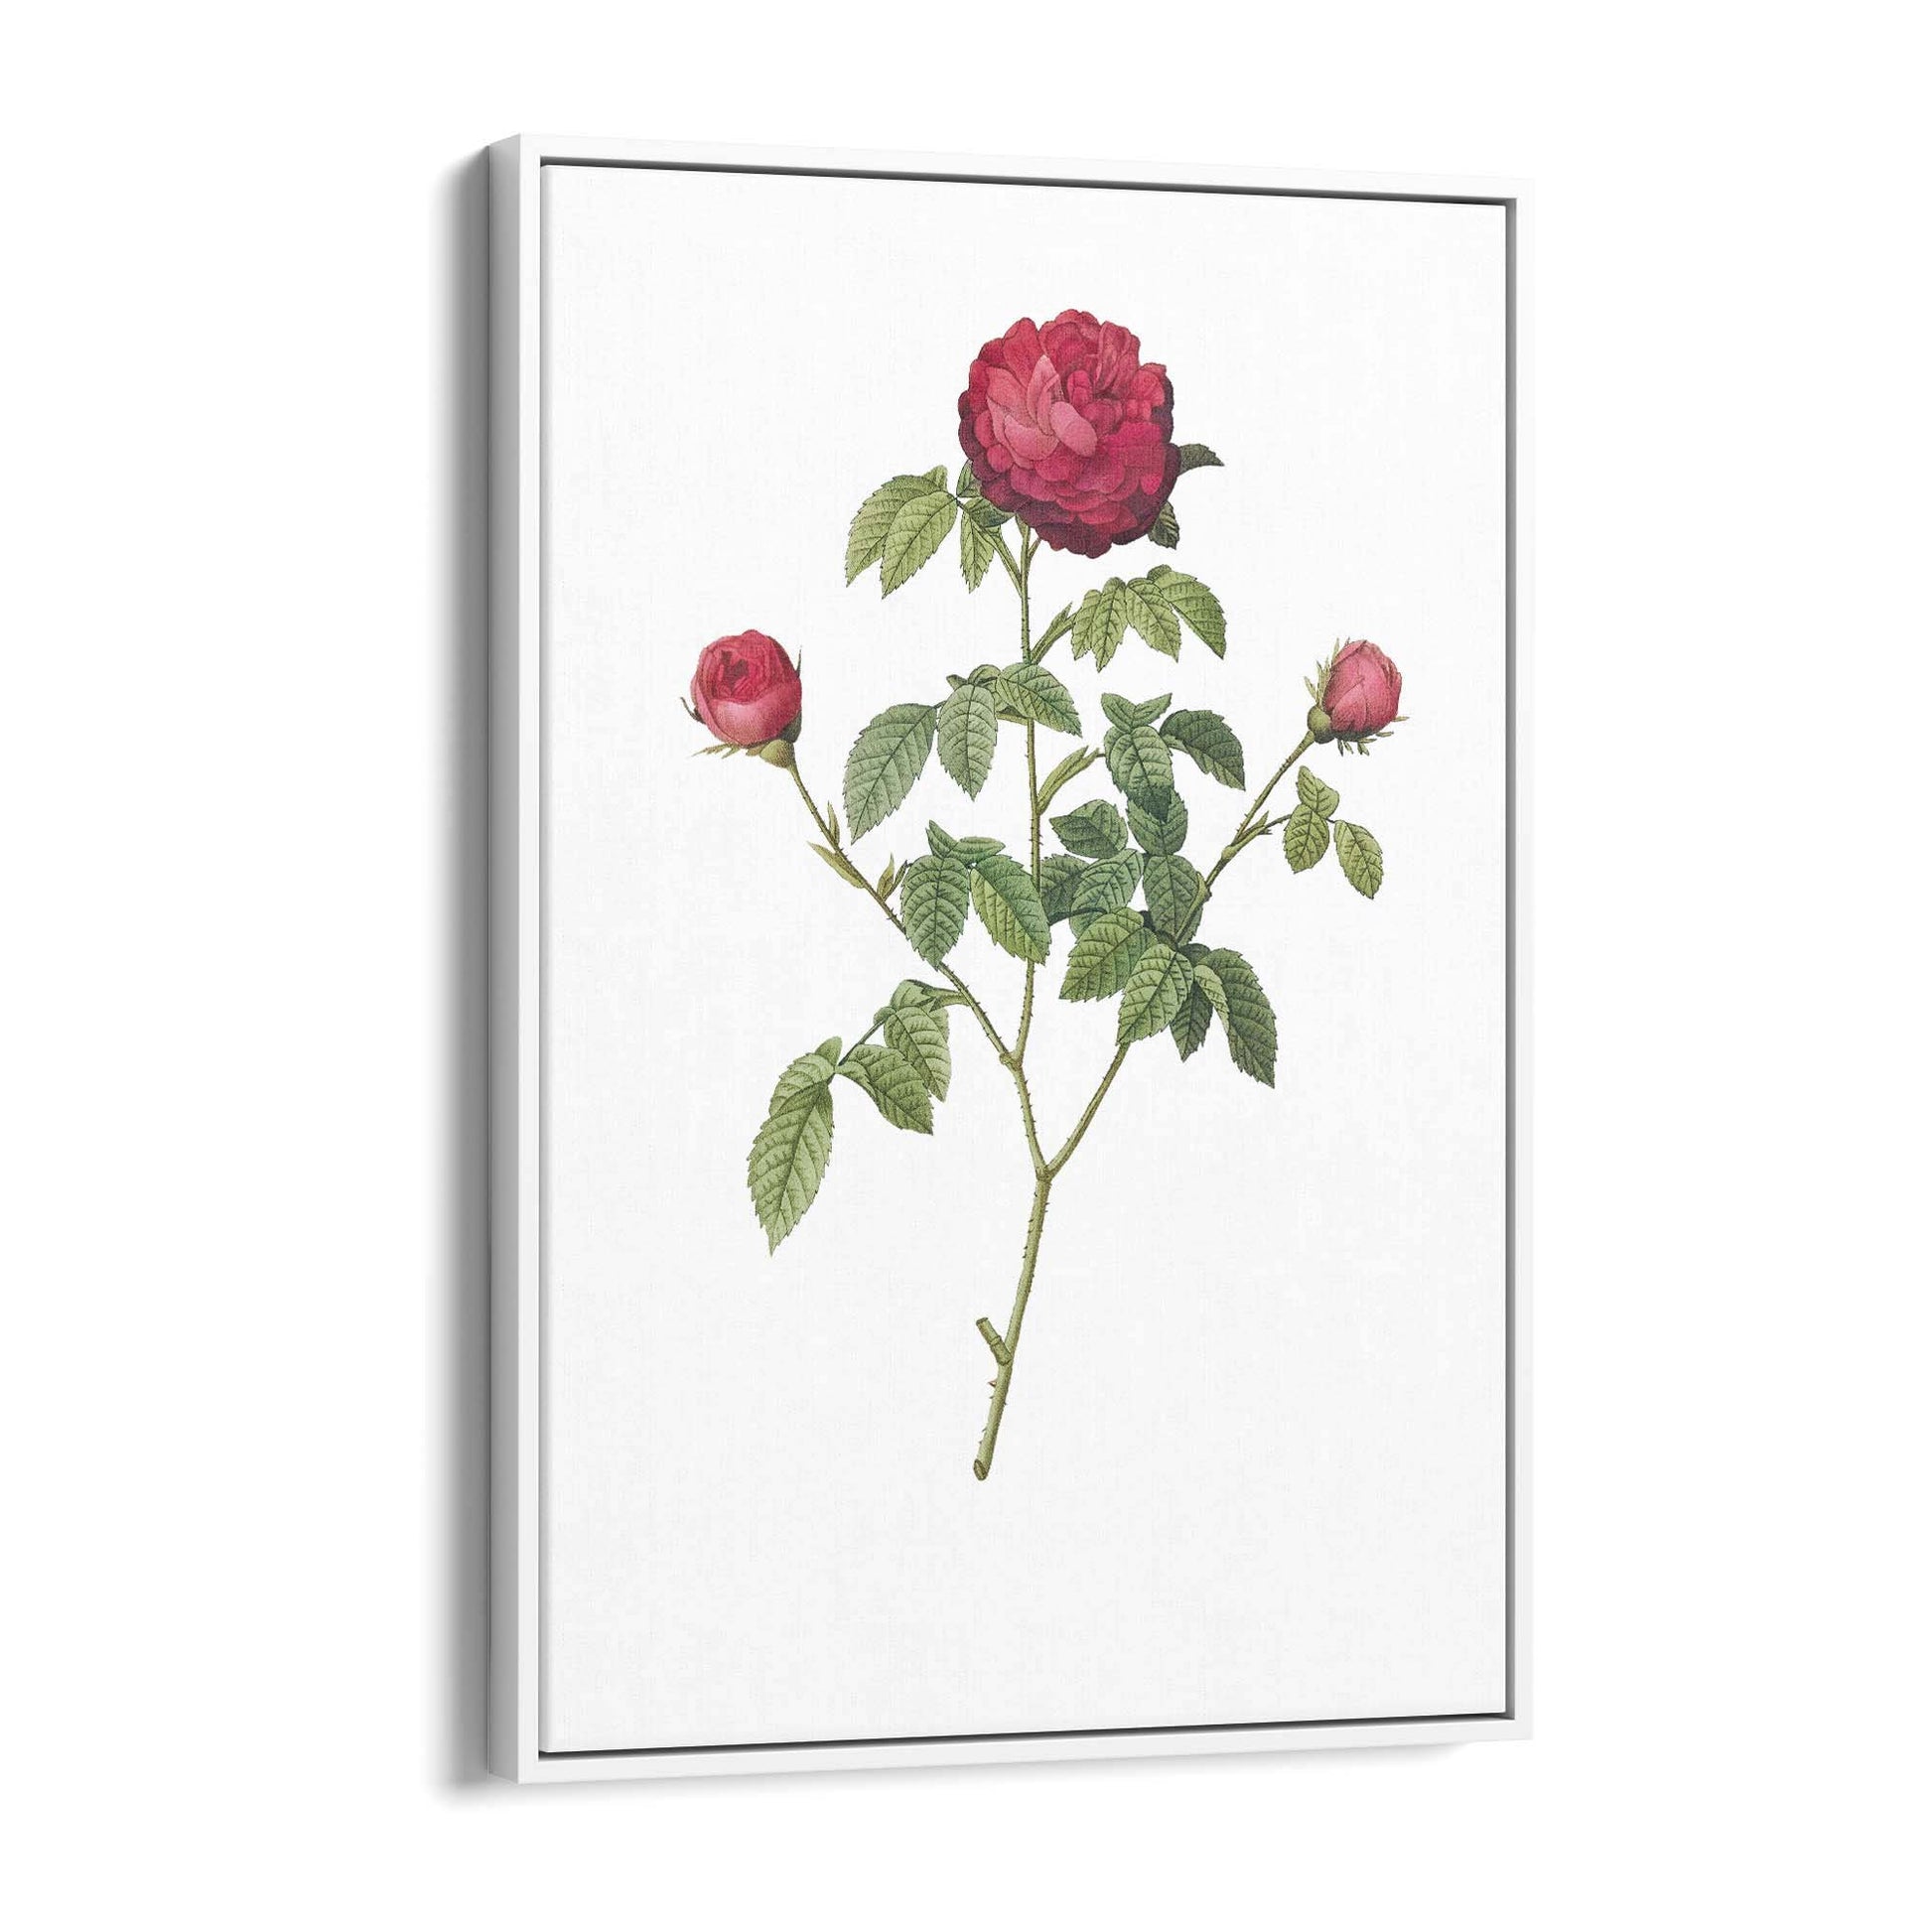 Flower Botanical Painting Kitchen Hallway Wall Art #3 - The Affordable Art Company